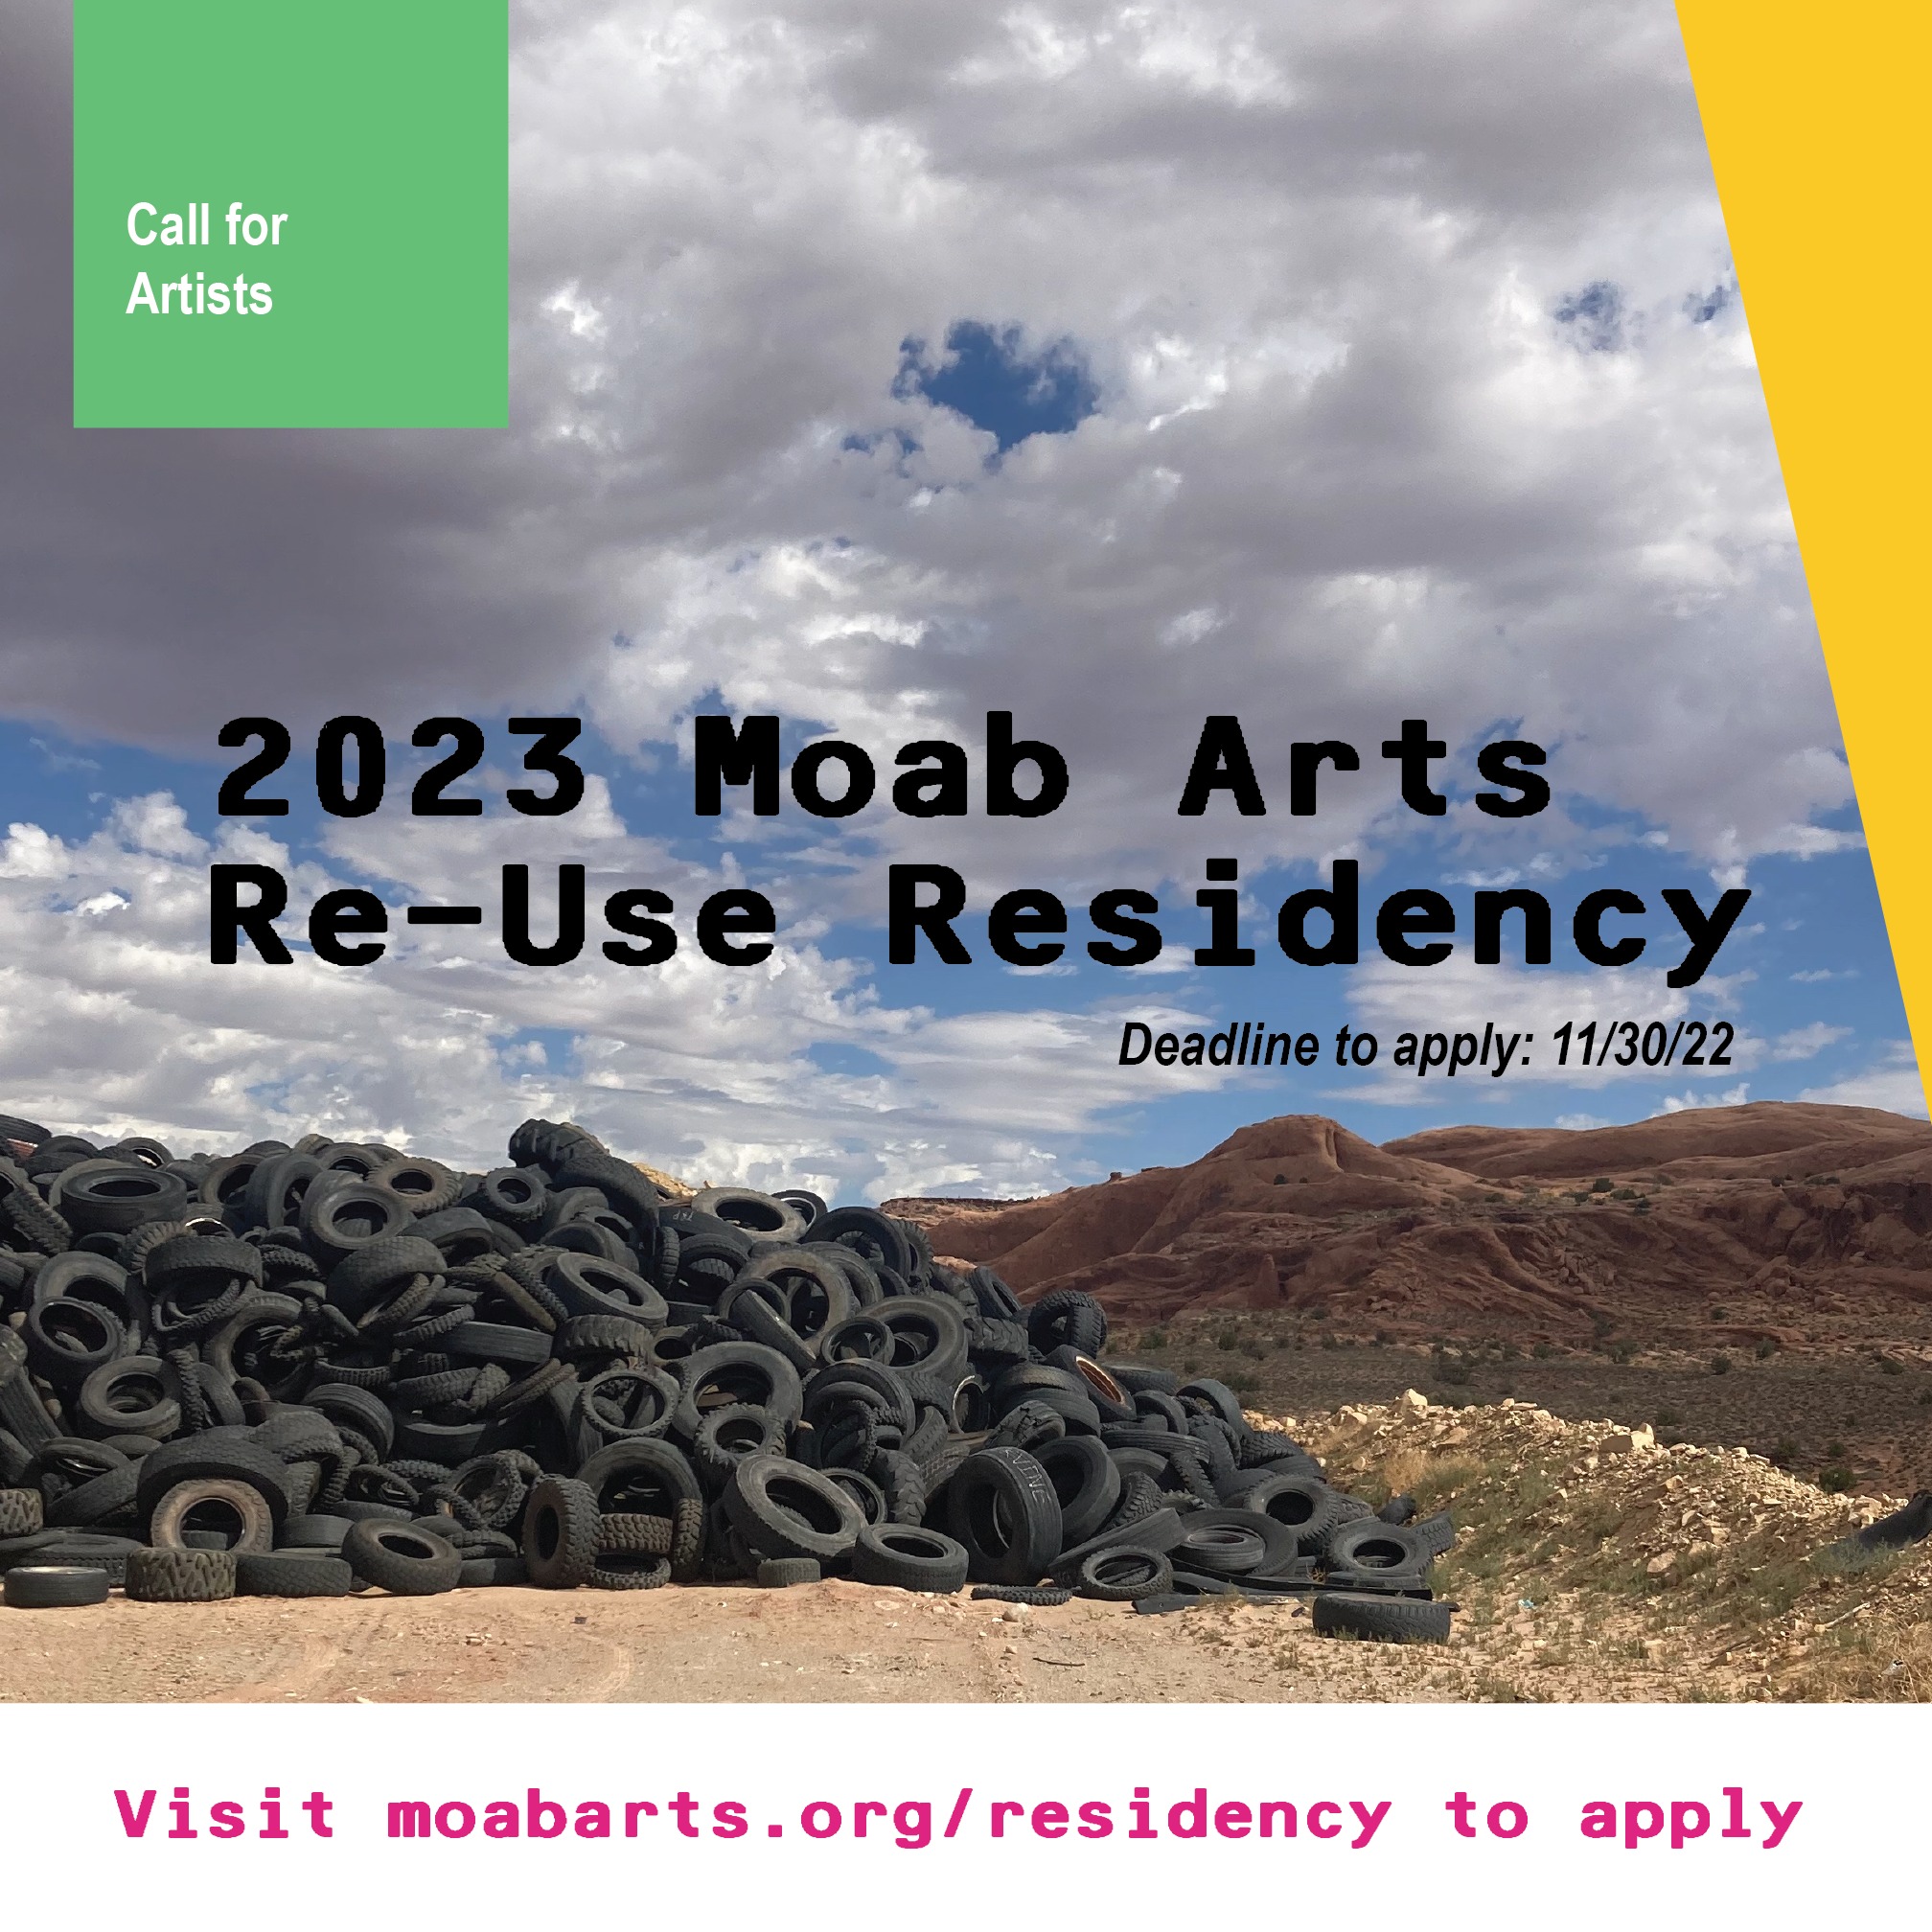 Moab Arts Re-Use Residency offers artists stipend and space for creation of new work. Deadline: November 30.